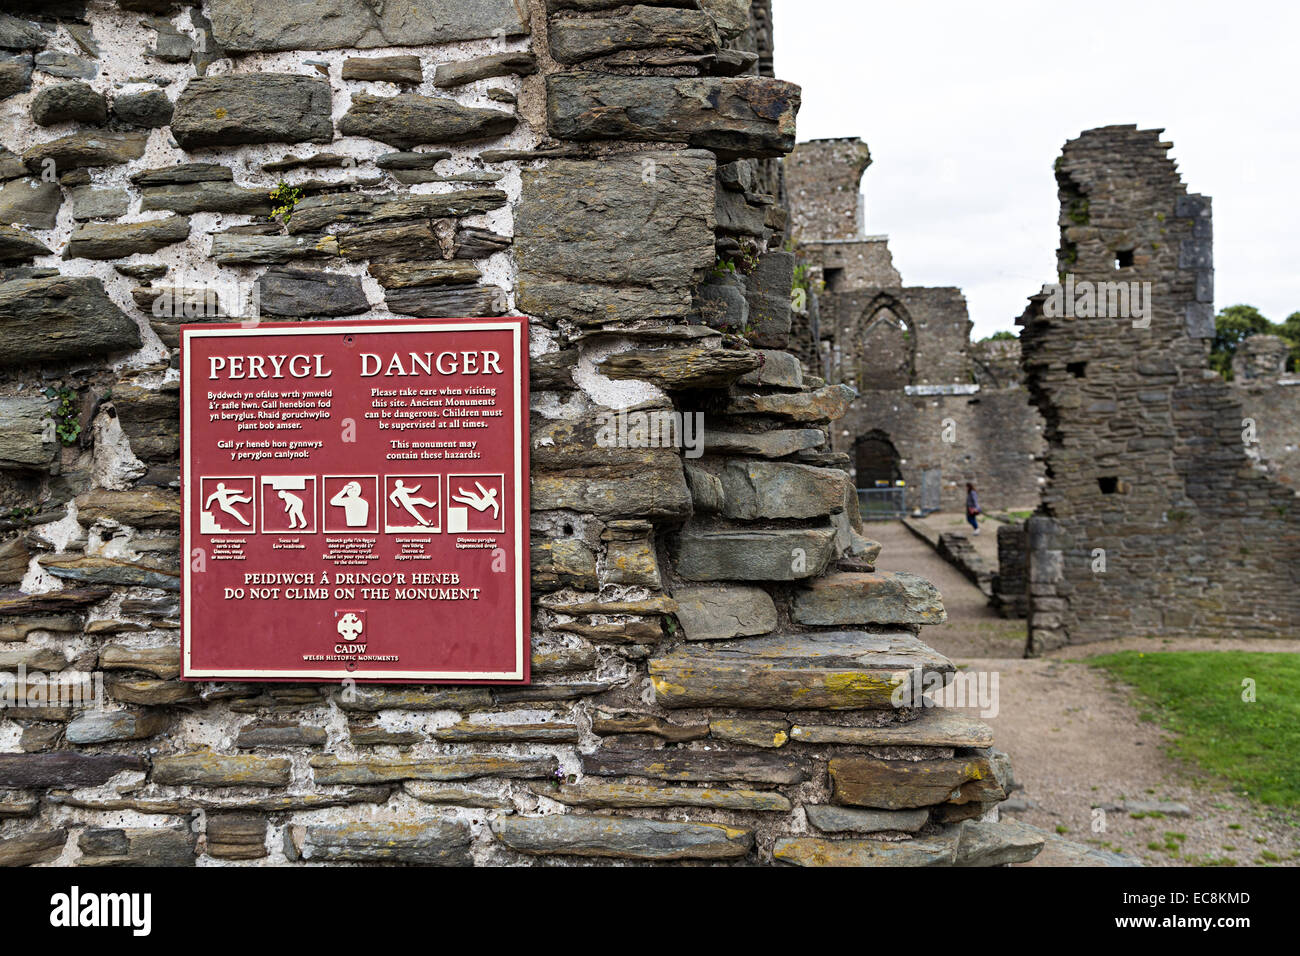 Danger do not climb on ruin sign in English and Welsh, Neath Abbey ruins, Neath, Glamorgan, Wales, UK Stock Photo